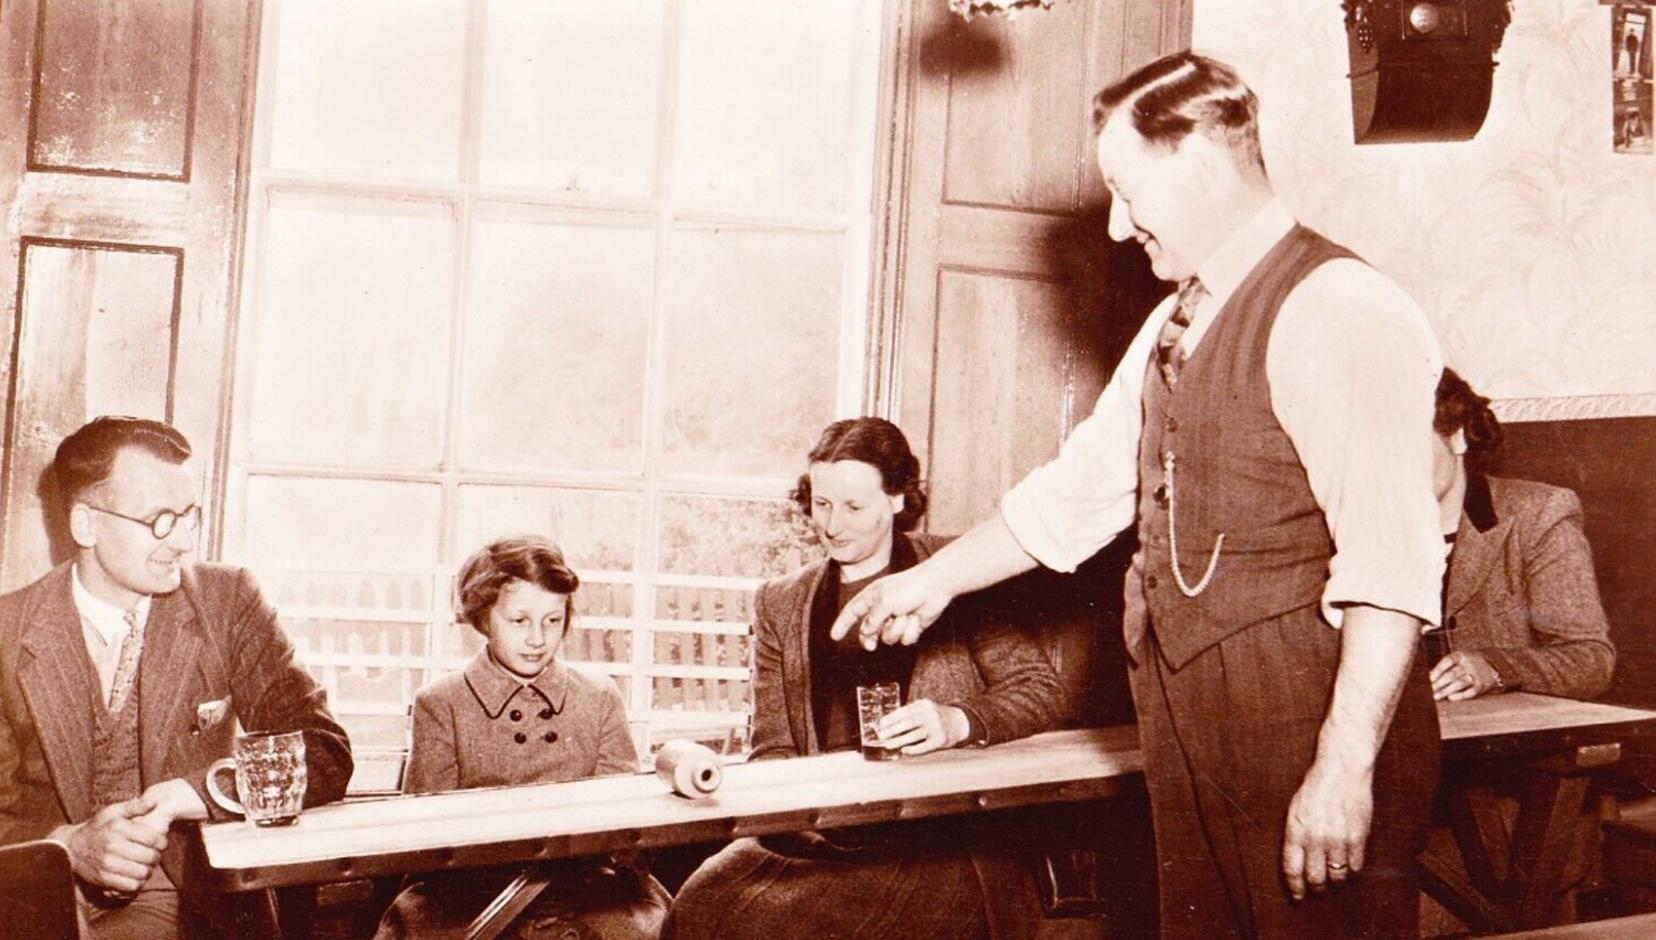 An old photo of the magic table where bottles rolled up-hill at The Crooked House pub.